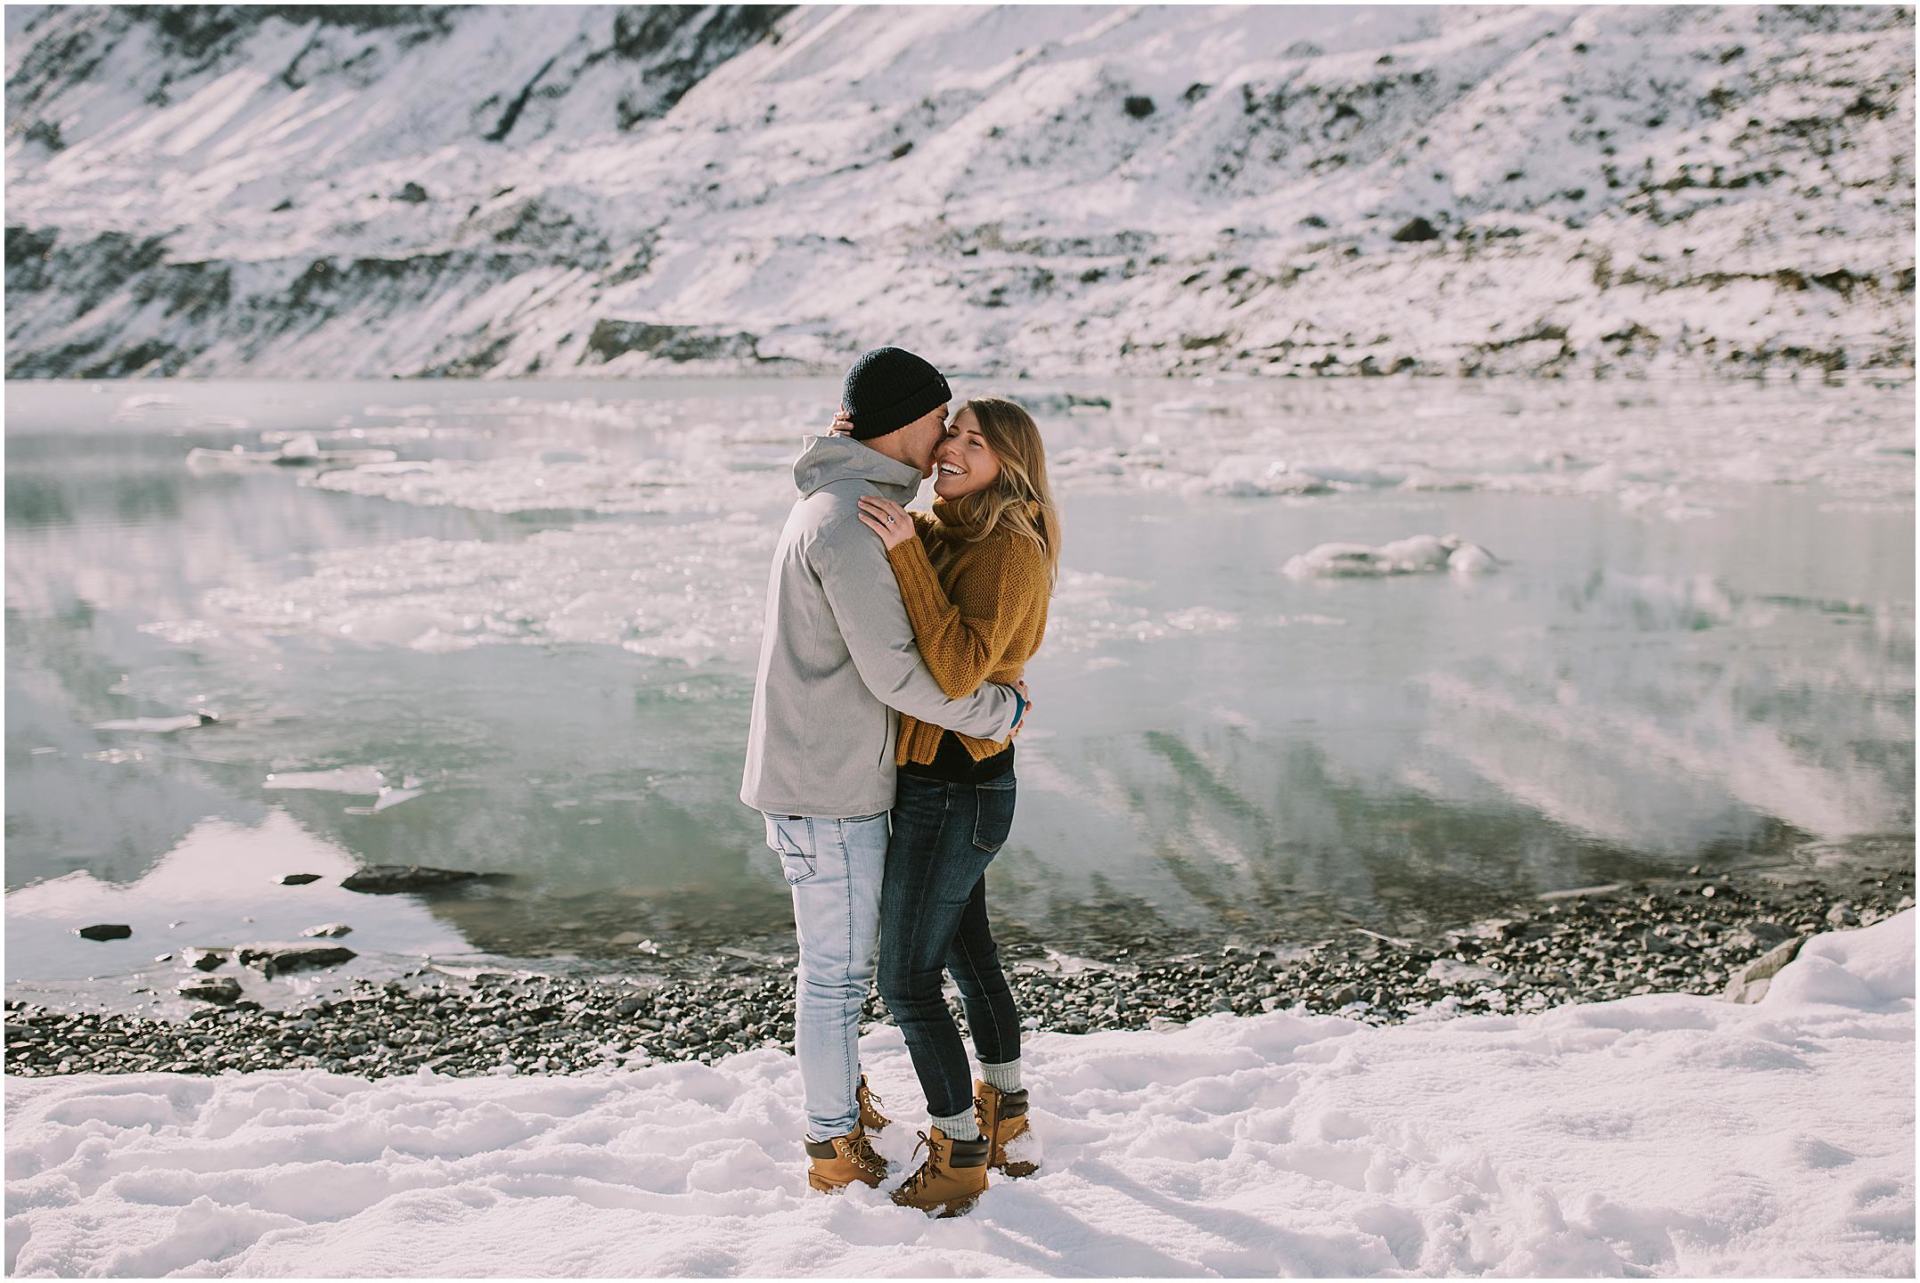 Charlotte Kiri Photography - Engagement Photography with the happy couple standing in the snow and embracing and smiling in front of a breathtaking glacial lake on Mount Cook, Aoraki, New Zealand